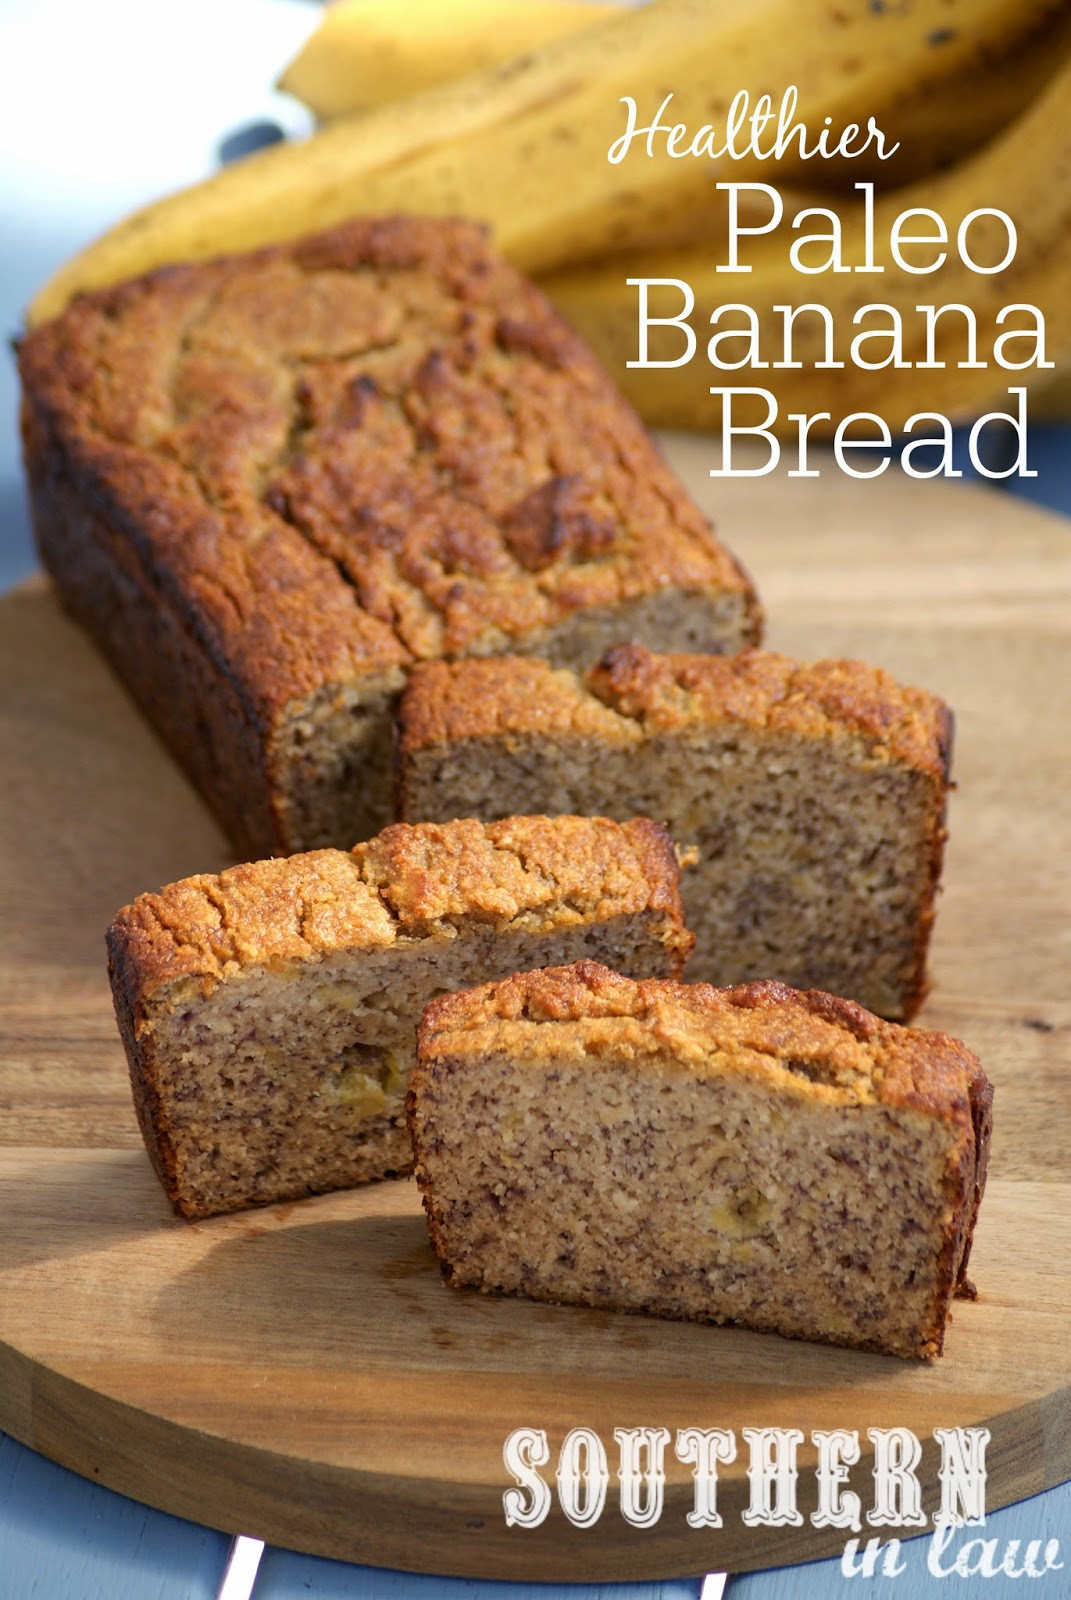 Low Carb Low Fat Bread Recipe
 Southern In Law Recipe The Best Healthy Paleo Banana Bread